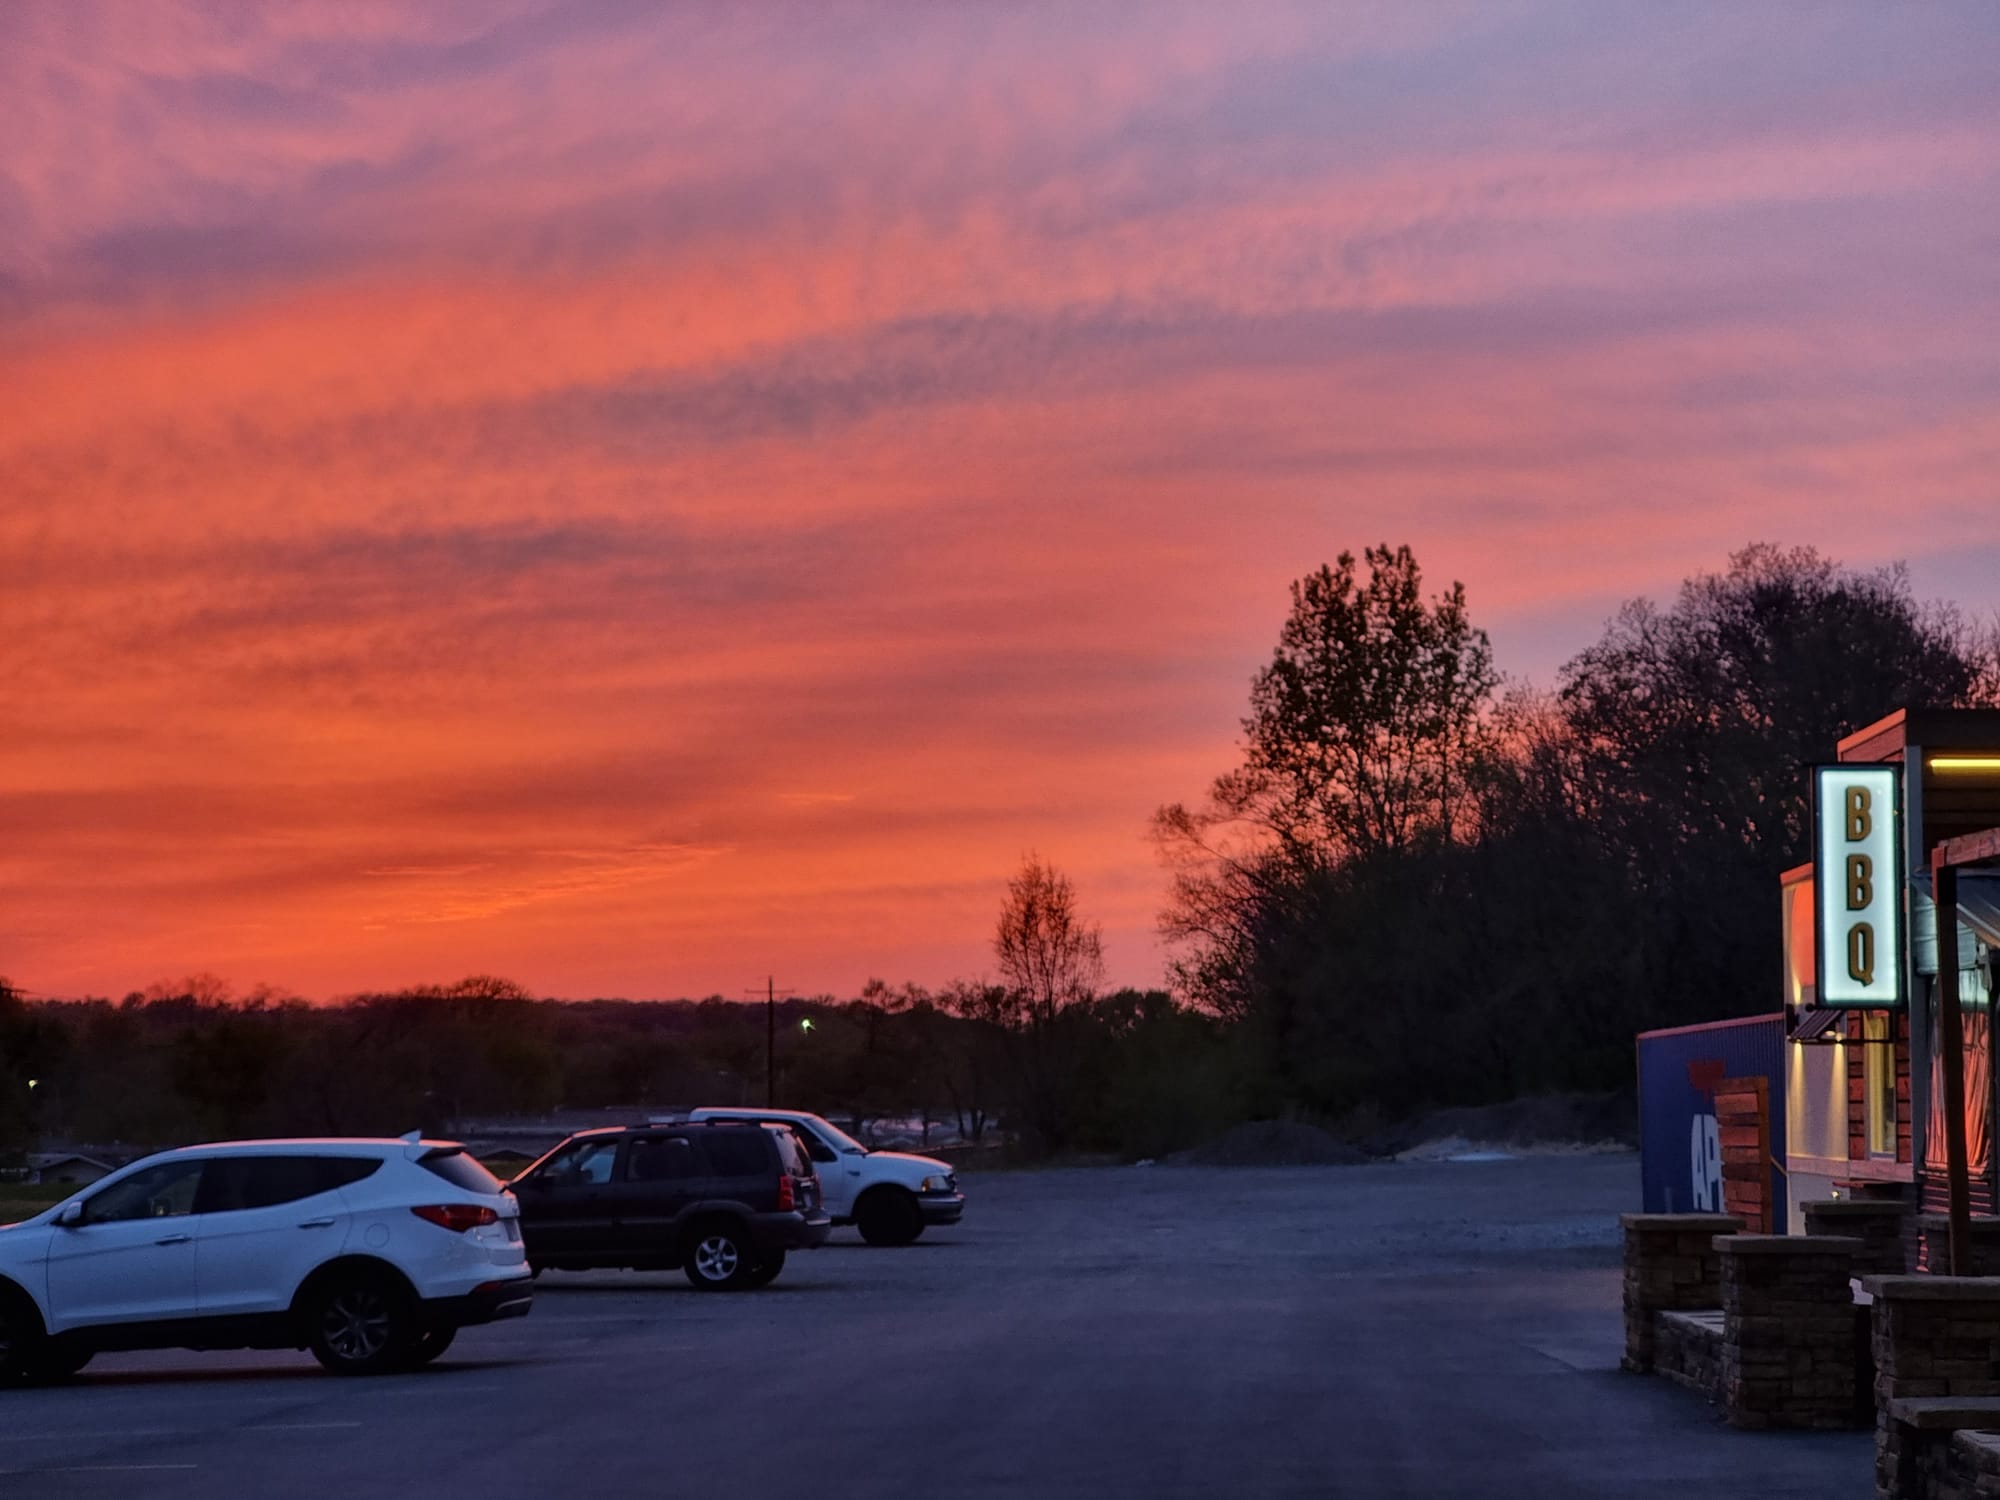 The Midwest sun in the background - a pinkish hue. In the foreground a parking lot with a few cars and to the side the steps of a restaurant and a sign saying "BBQ".